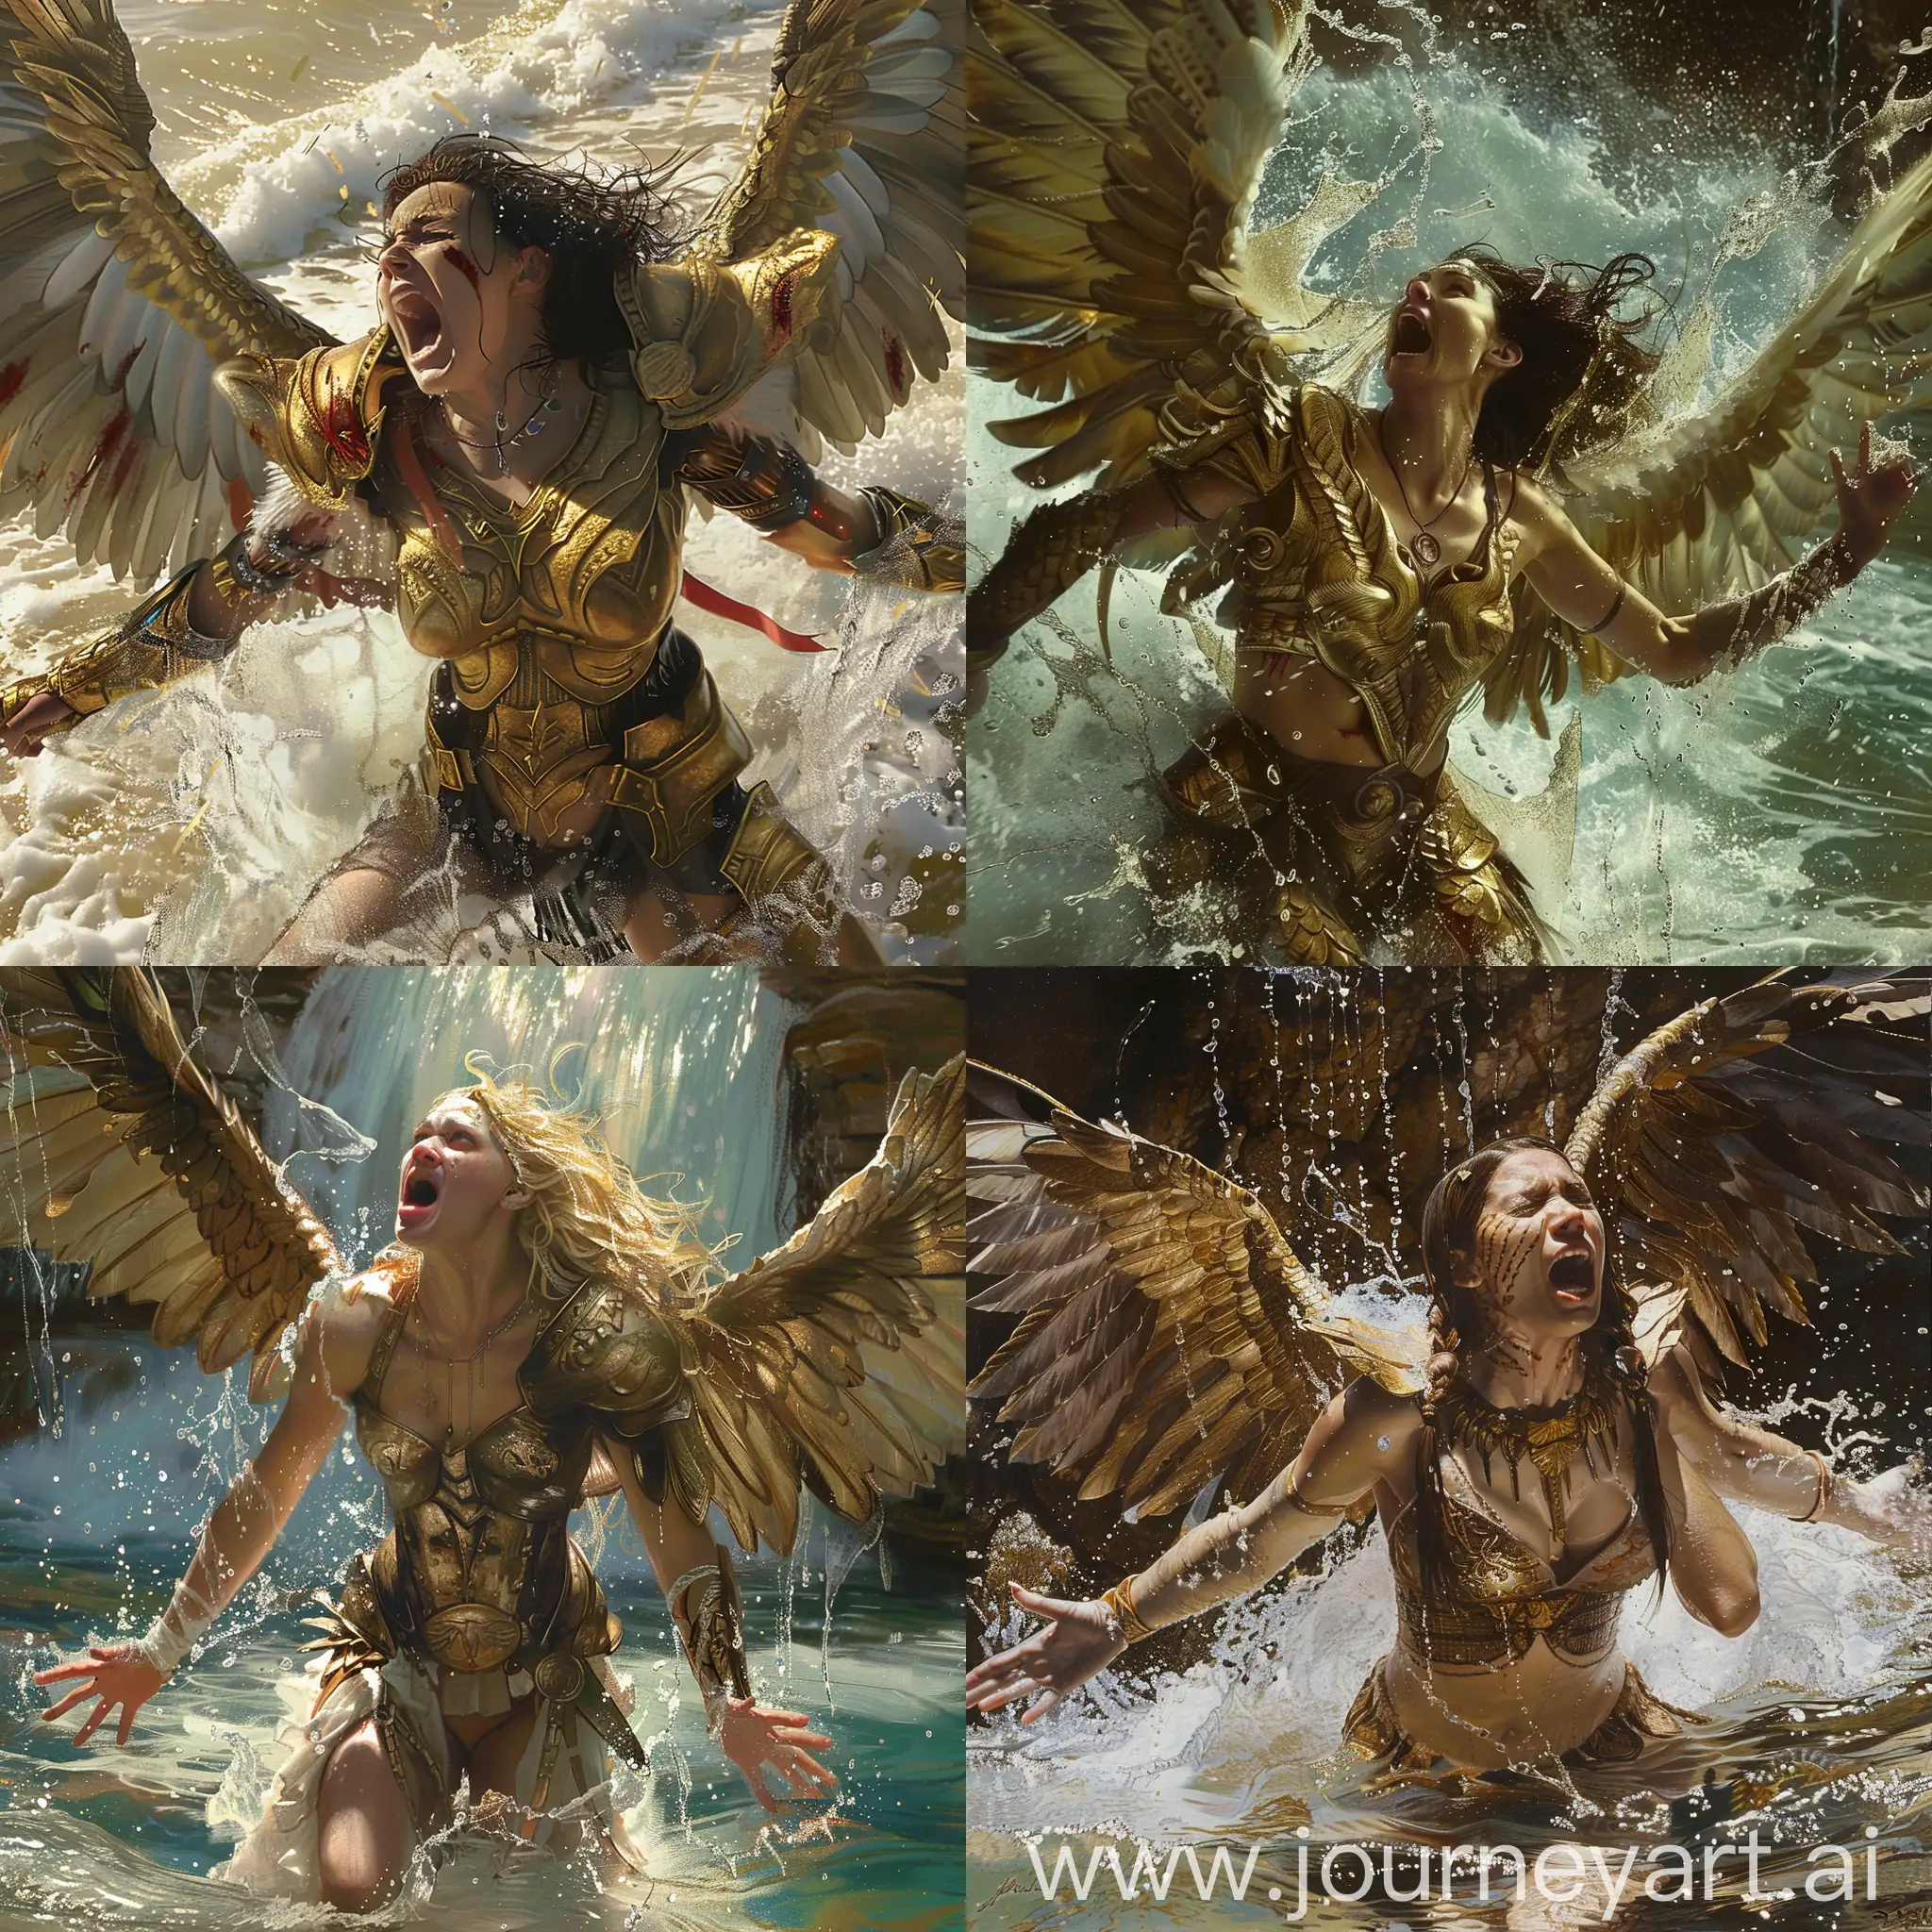 Golden-Armored-Woman-with-Wings-Emerging-from-Water